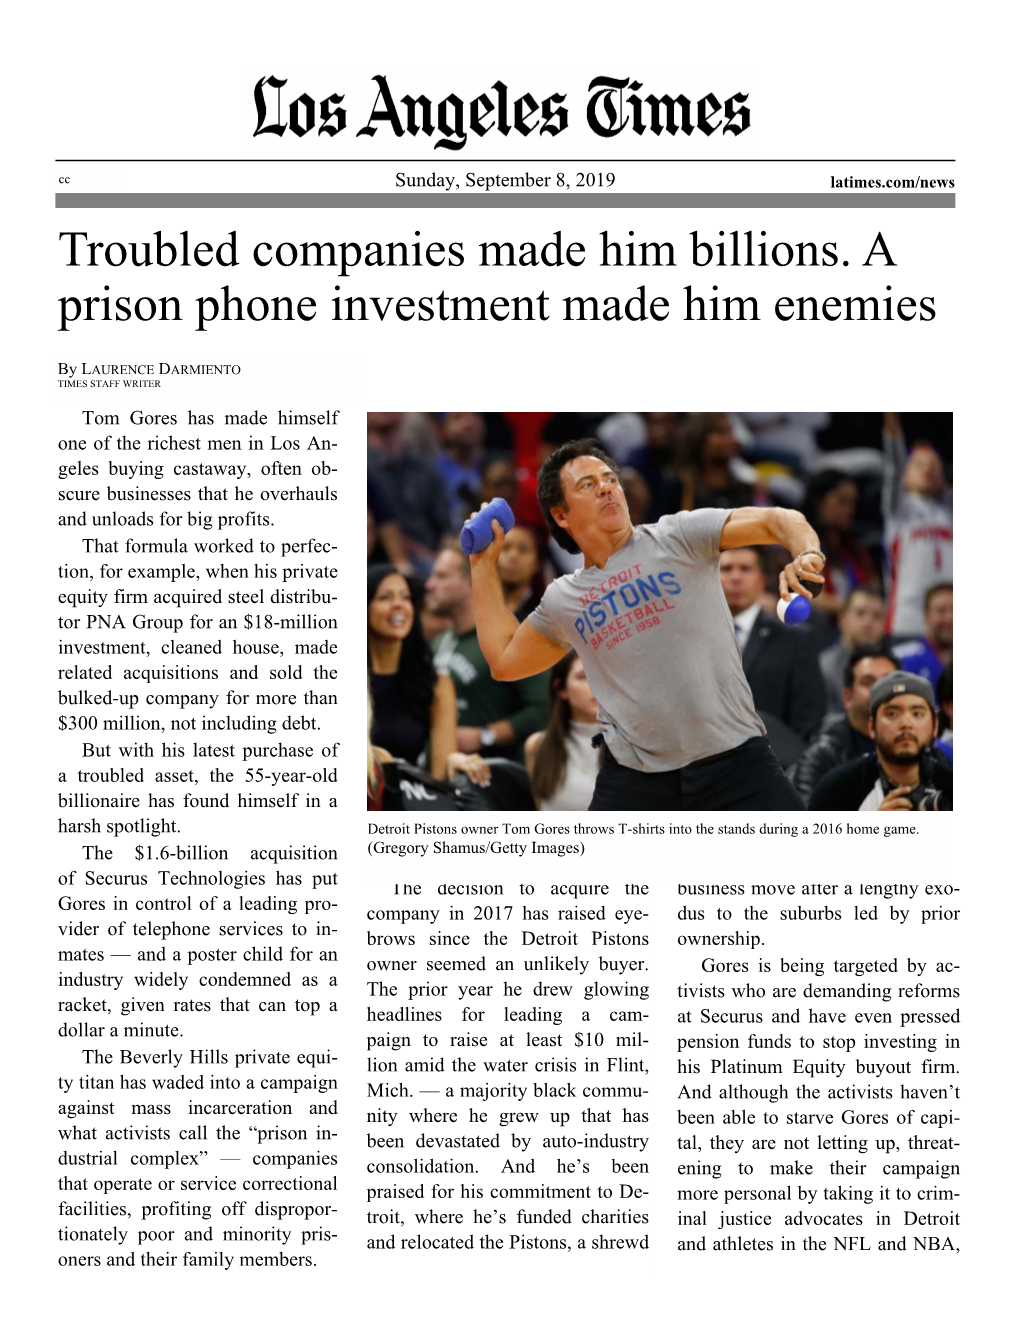 Troubled Companies Made Him Billions. a Prison Phone Investment Made Him Enemies September 8, 2019